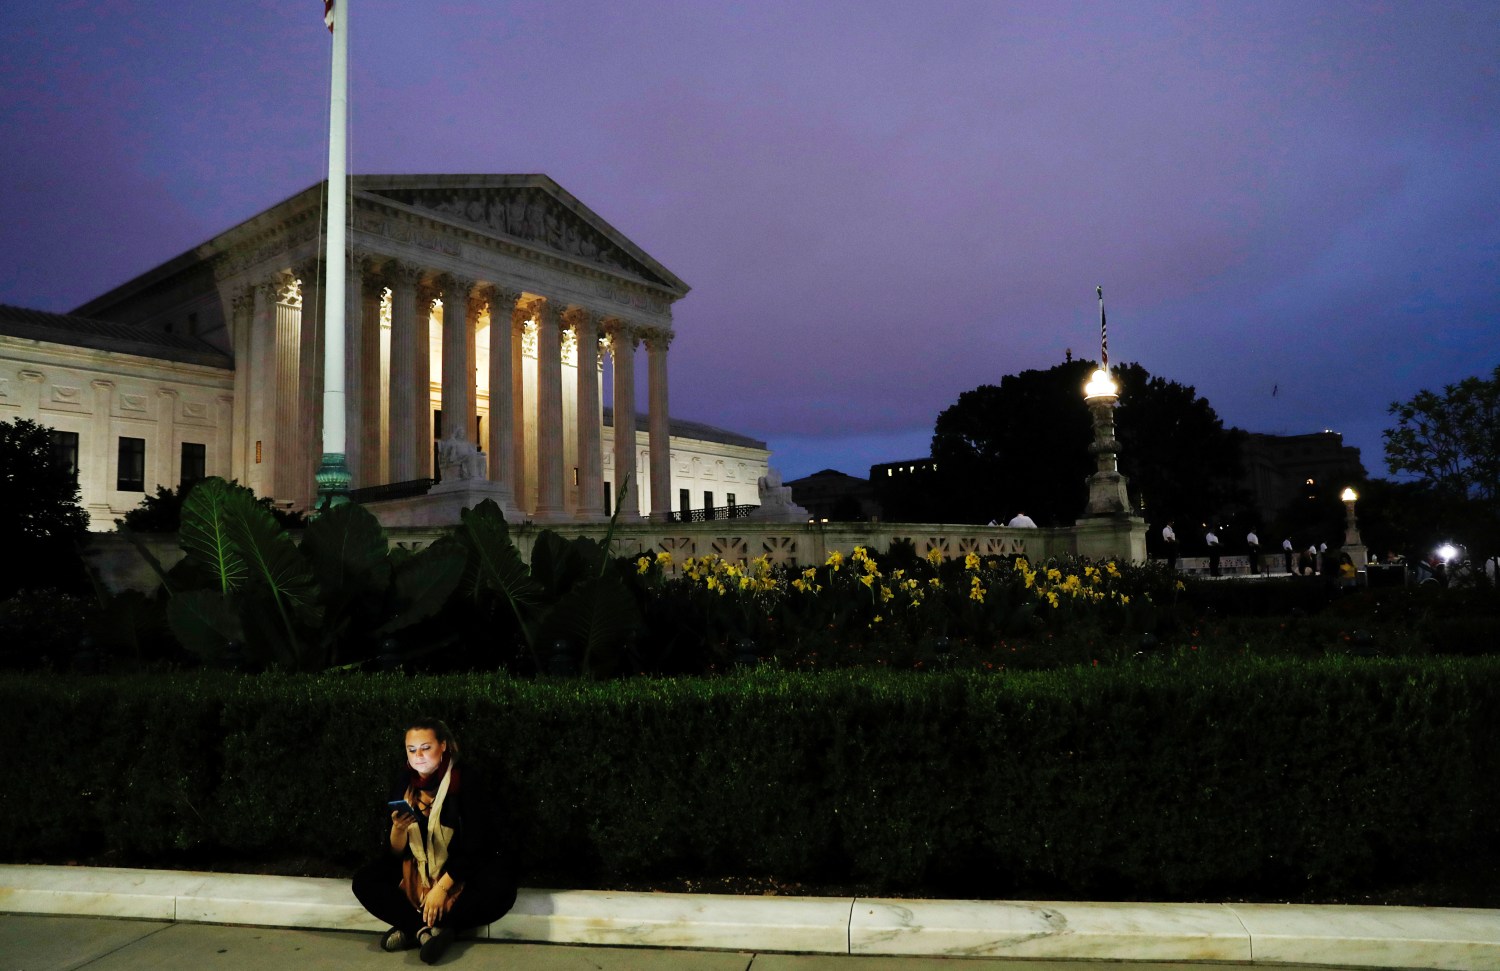 A lone woman sits outside the U.S. Supreme Court building after Justice Brett Kavanaugh was sworn in as an Associate Justice of the court inside on Capitol Hill in Washington, U.S., October 6, 2018.  REUTERS/Carlos Barria - RC13DDDC1740